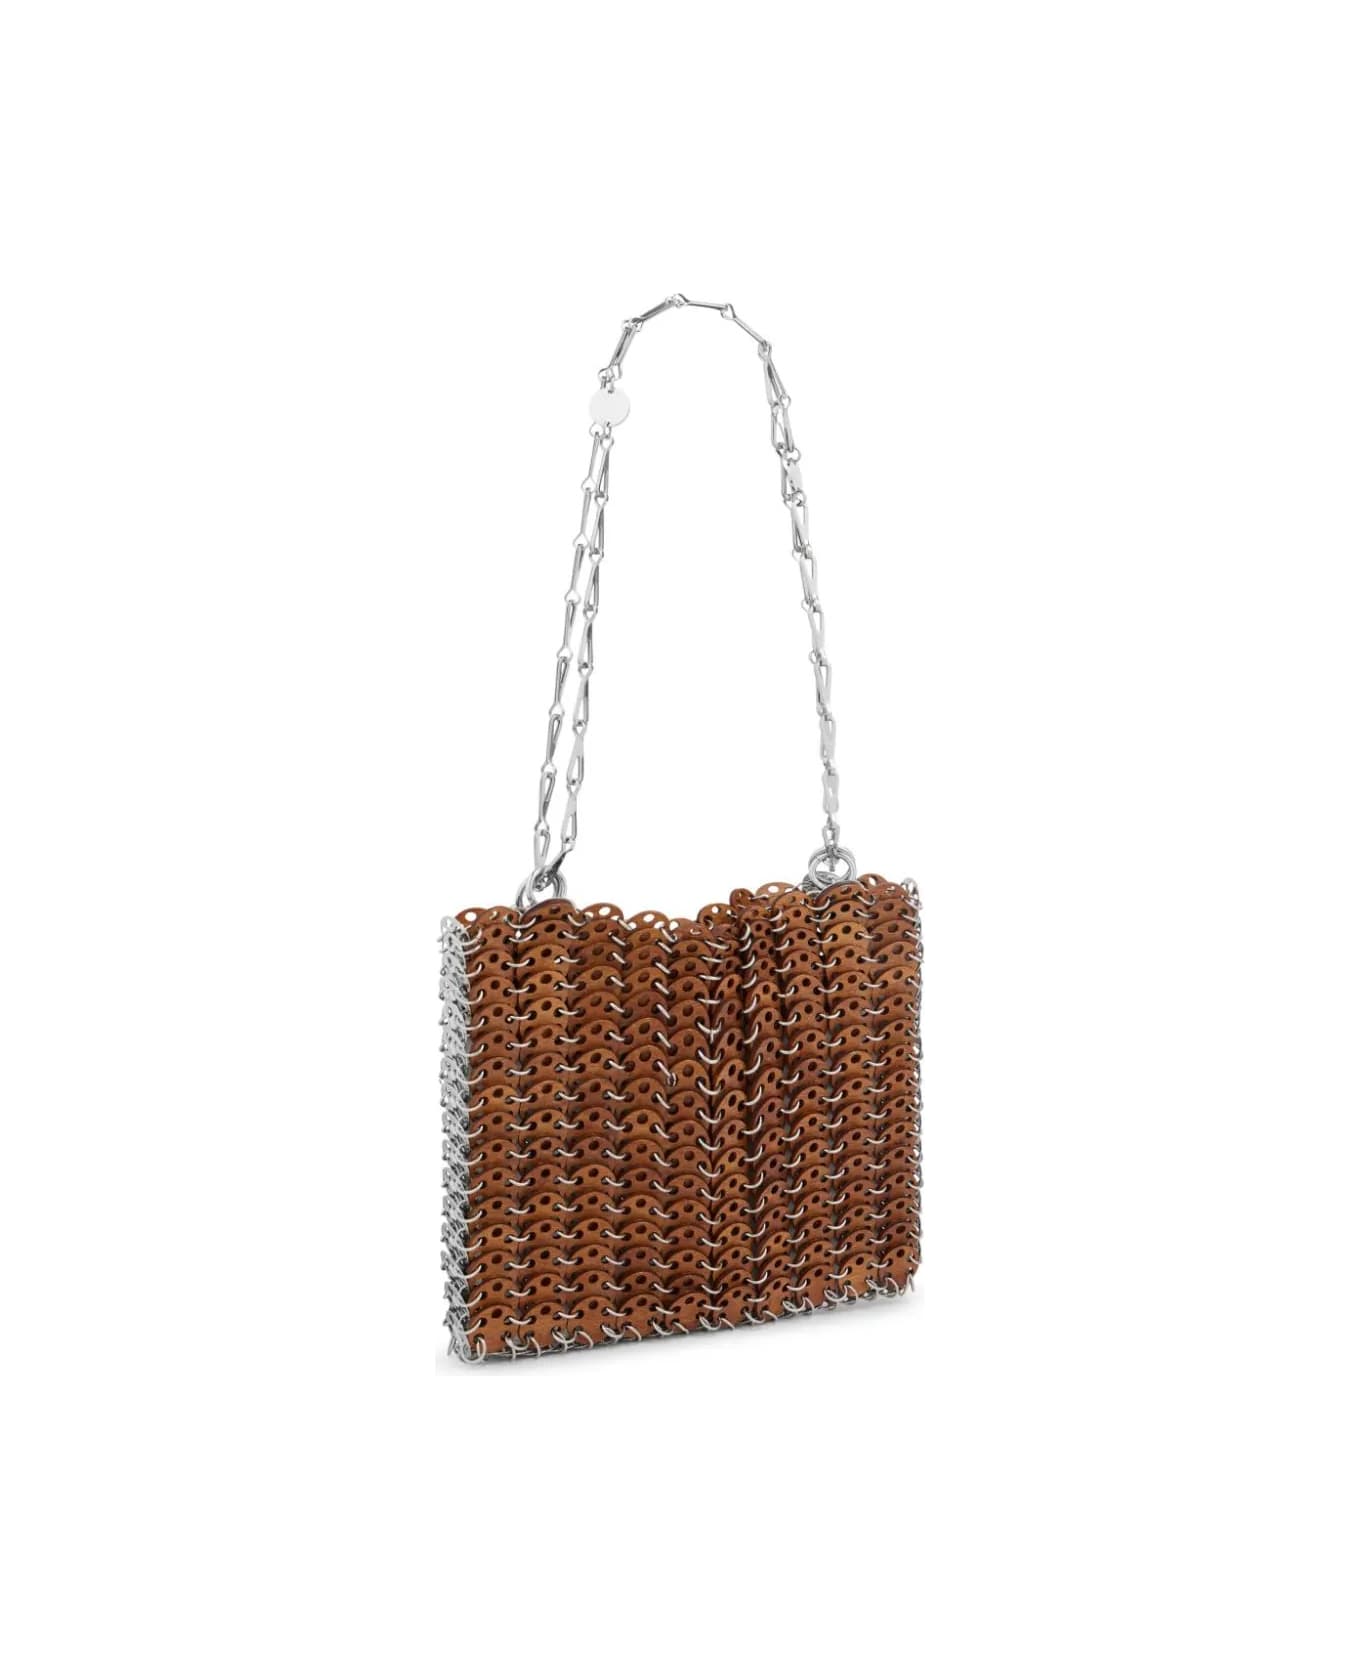 Paco Rabanne Iconic 1969 Bag In Brown Wood - Brown